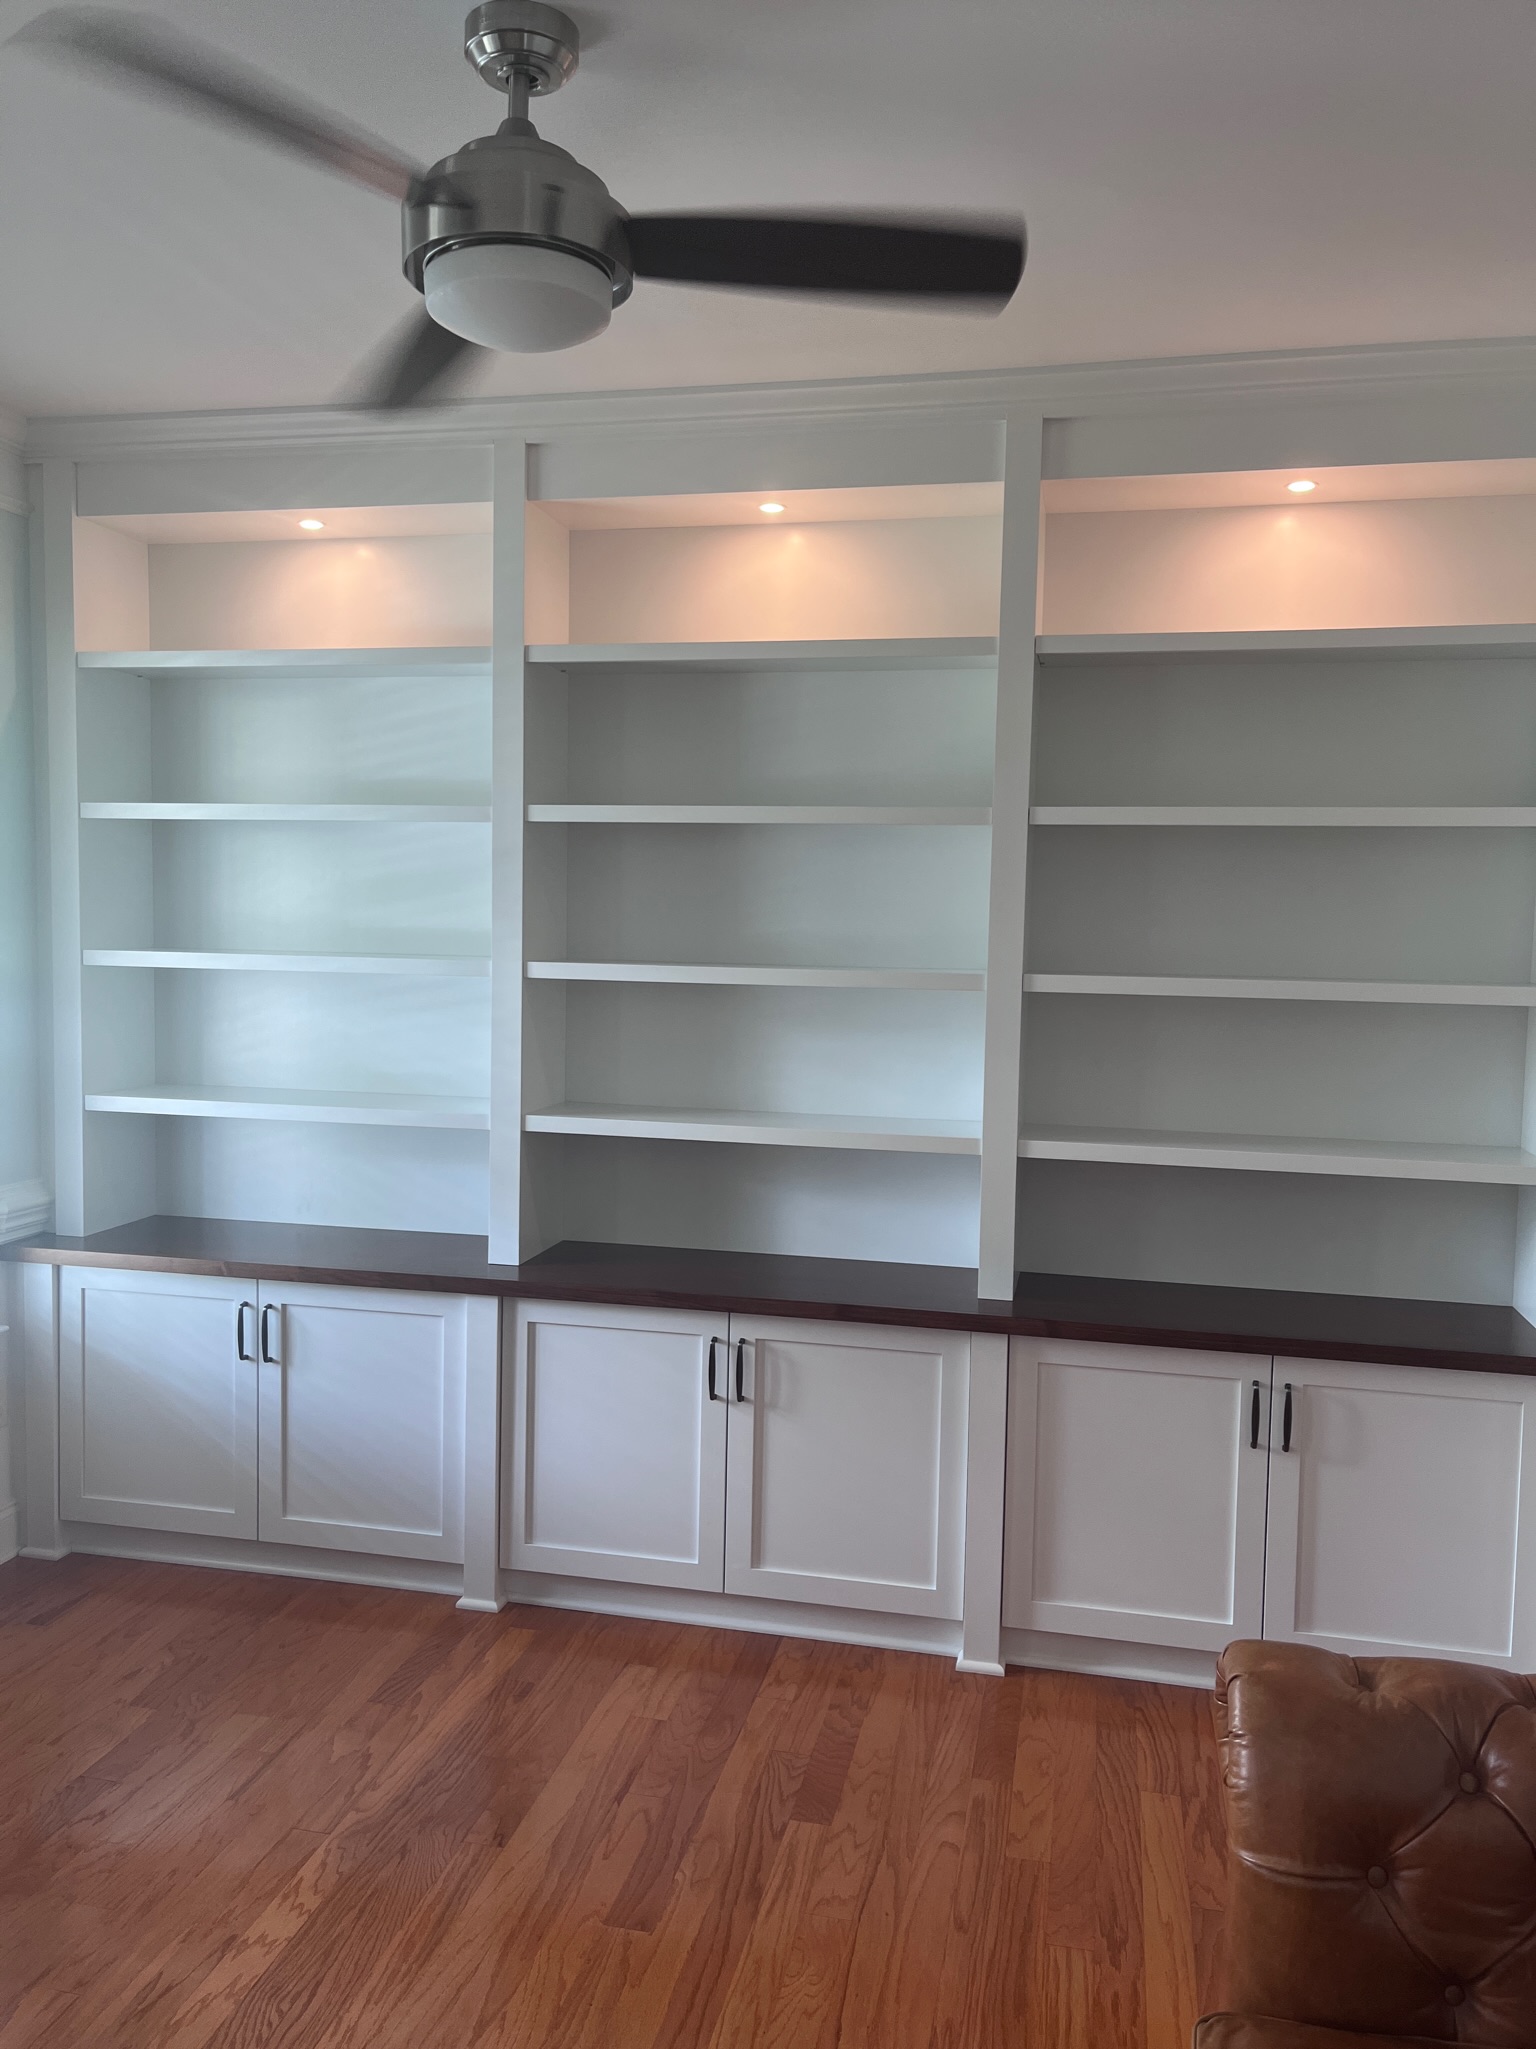 Custom cabinets and display shelves